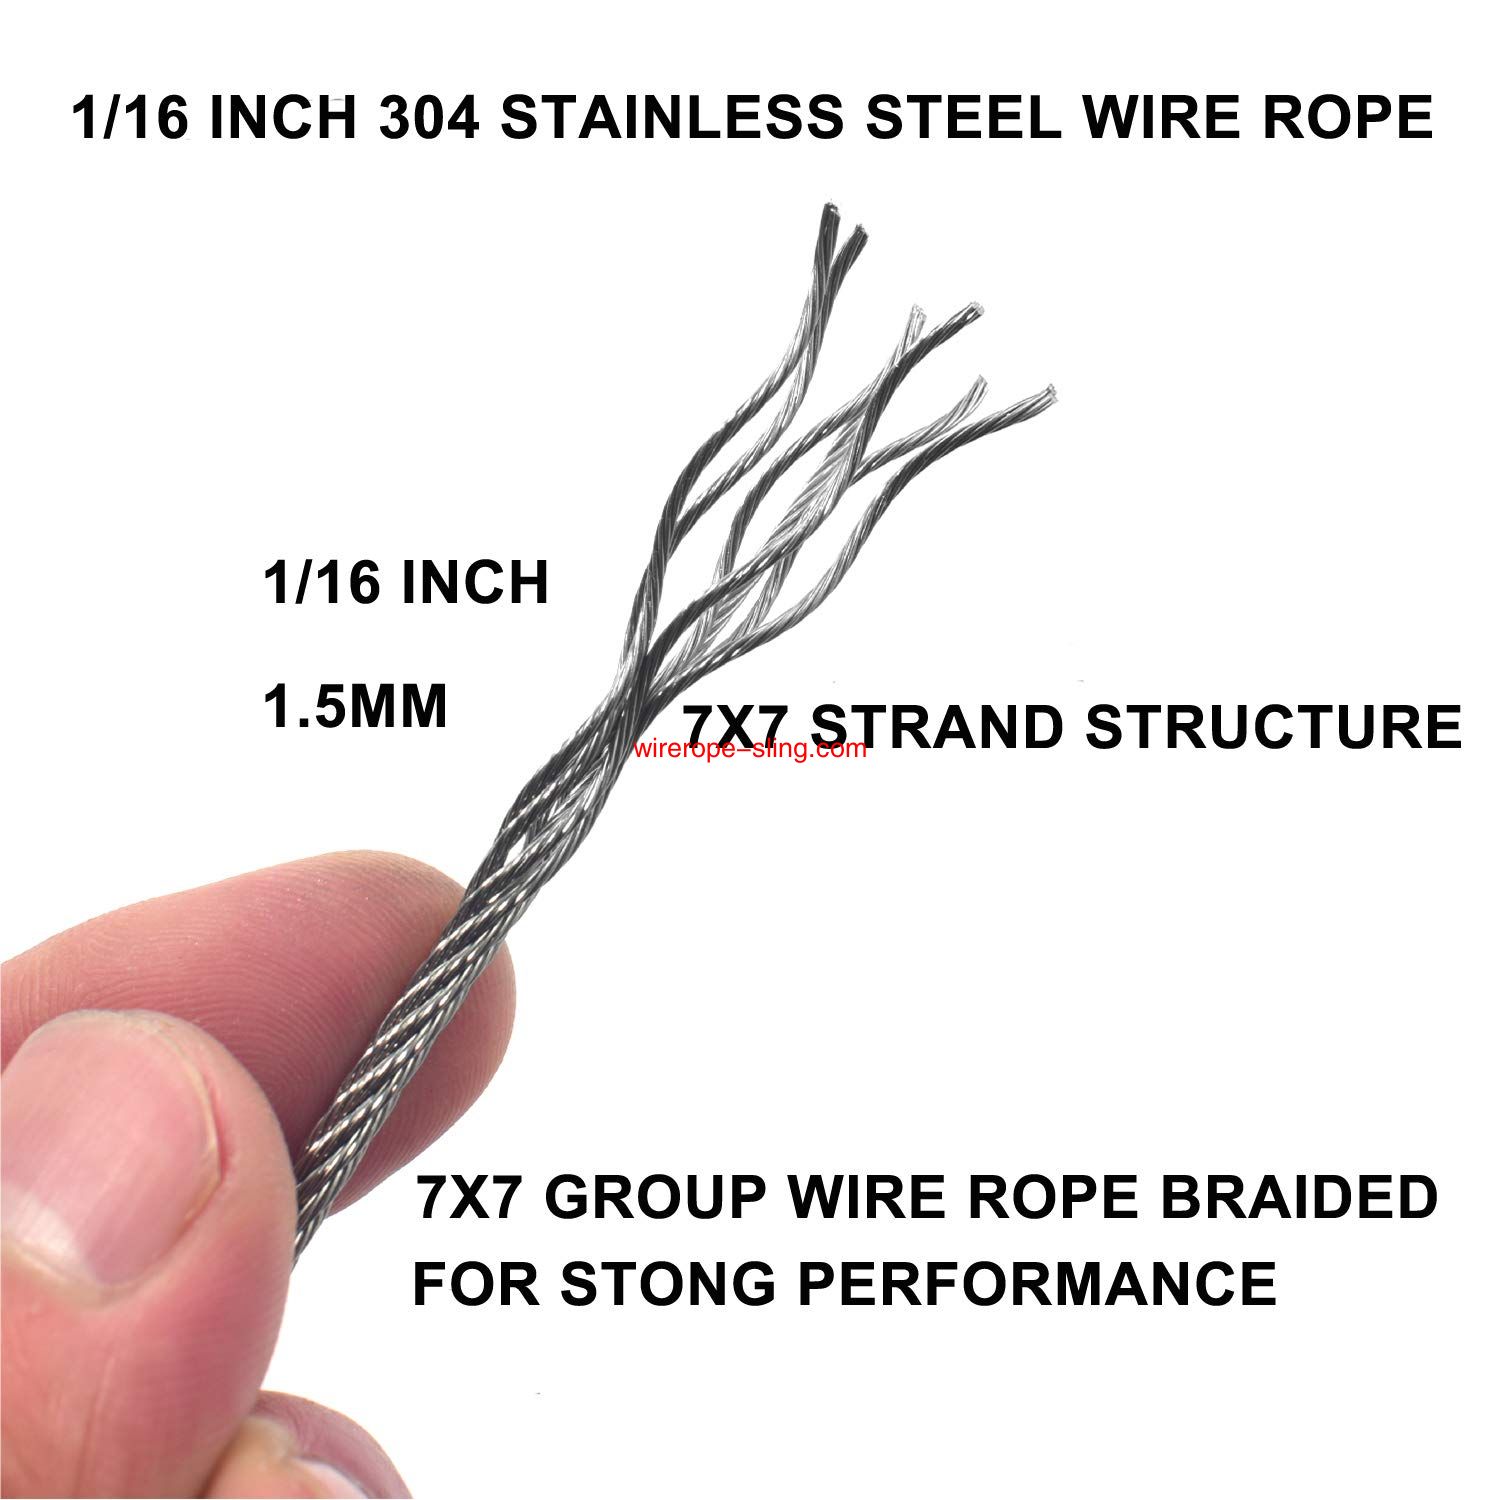 1/16 Inch Vinyl Coated Wire Rope Kit,330 Feet Stainless Steel 304